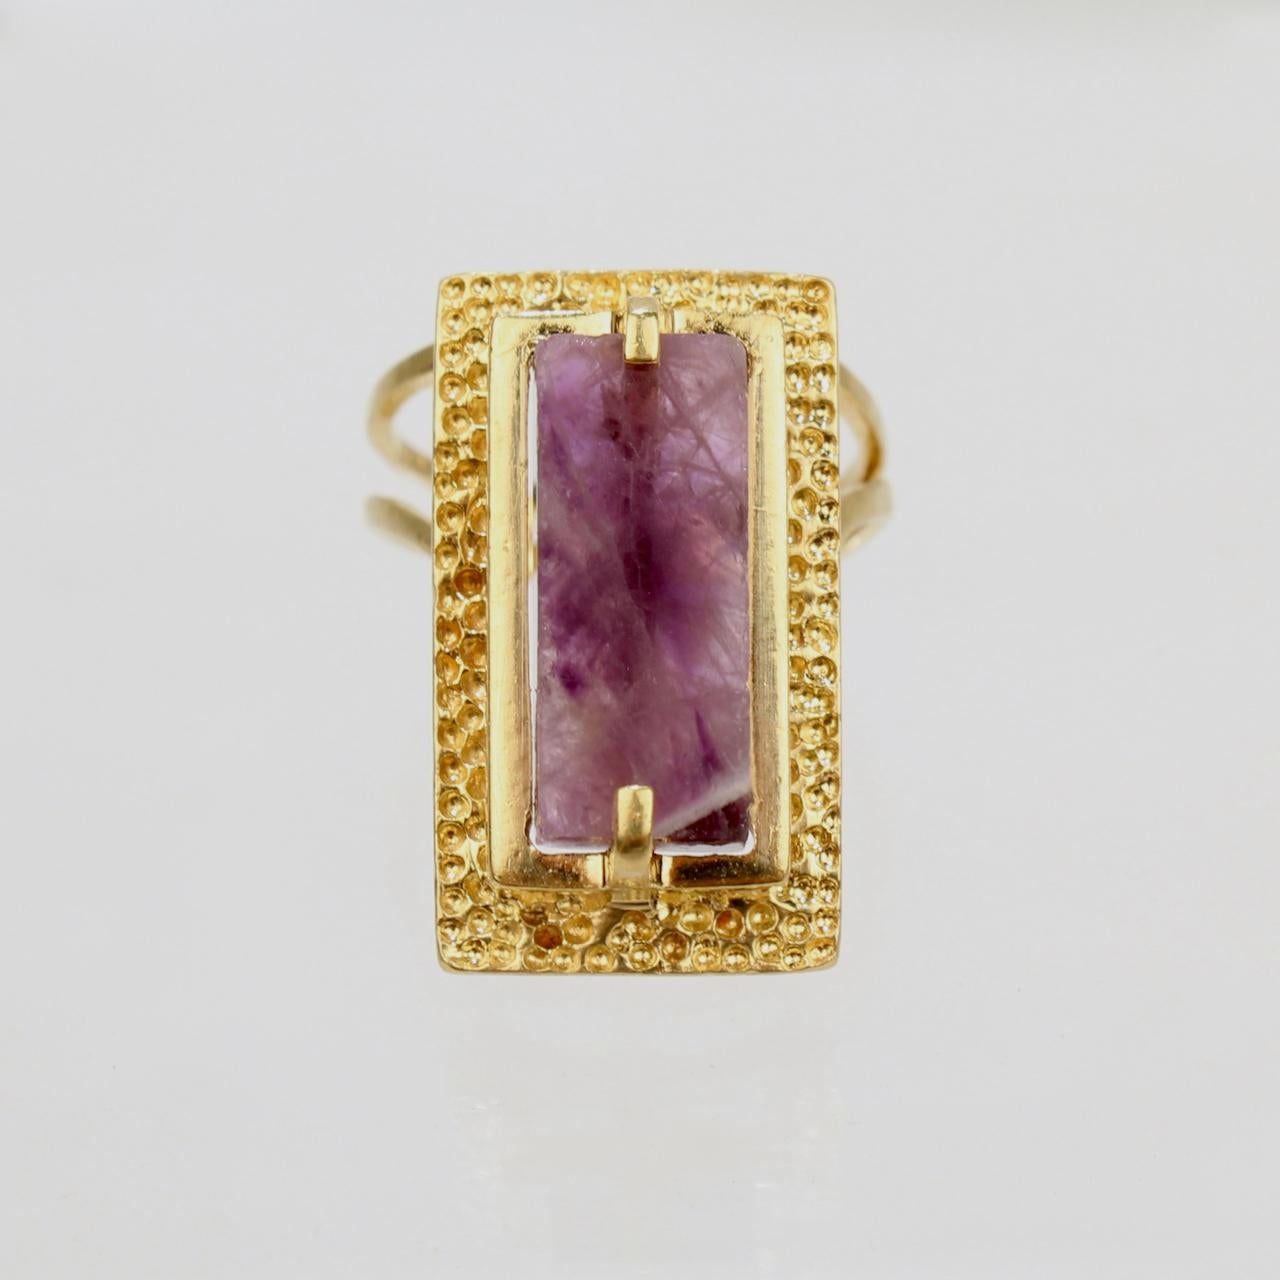 Modernist Asymmetrical 18k Gold and Rough Cut Amethyst Gemstone Cocktail Ring For Sale 2